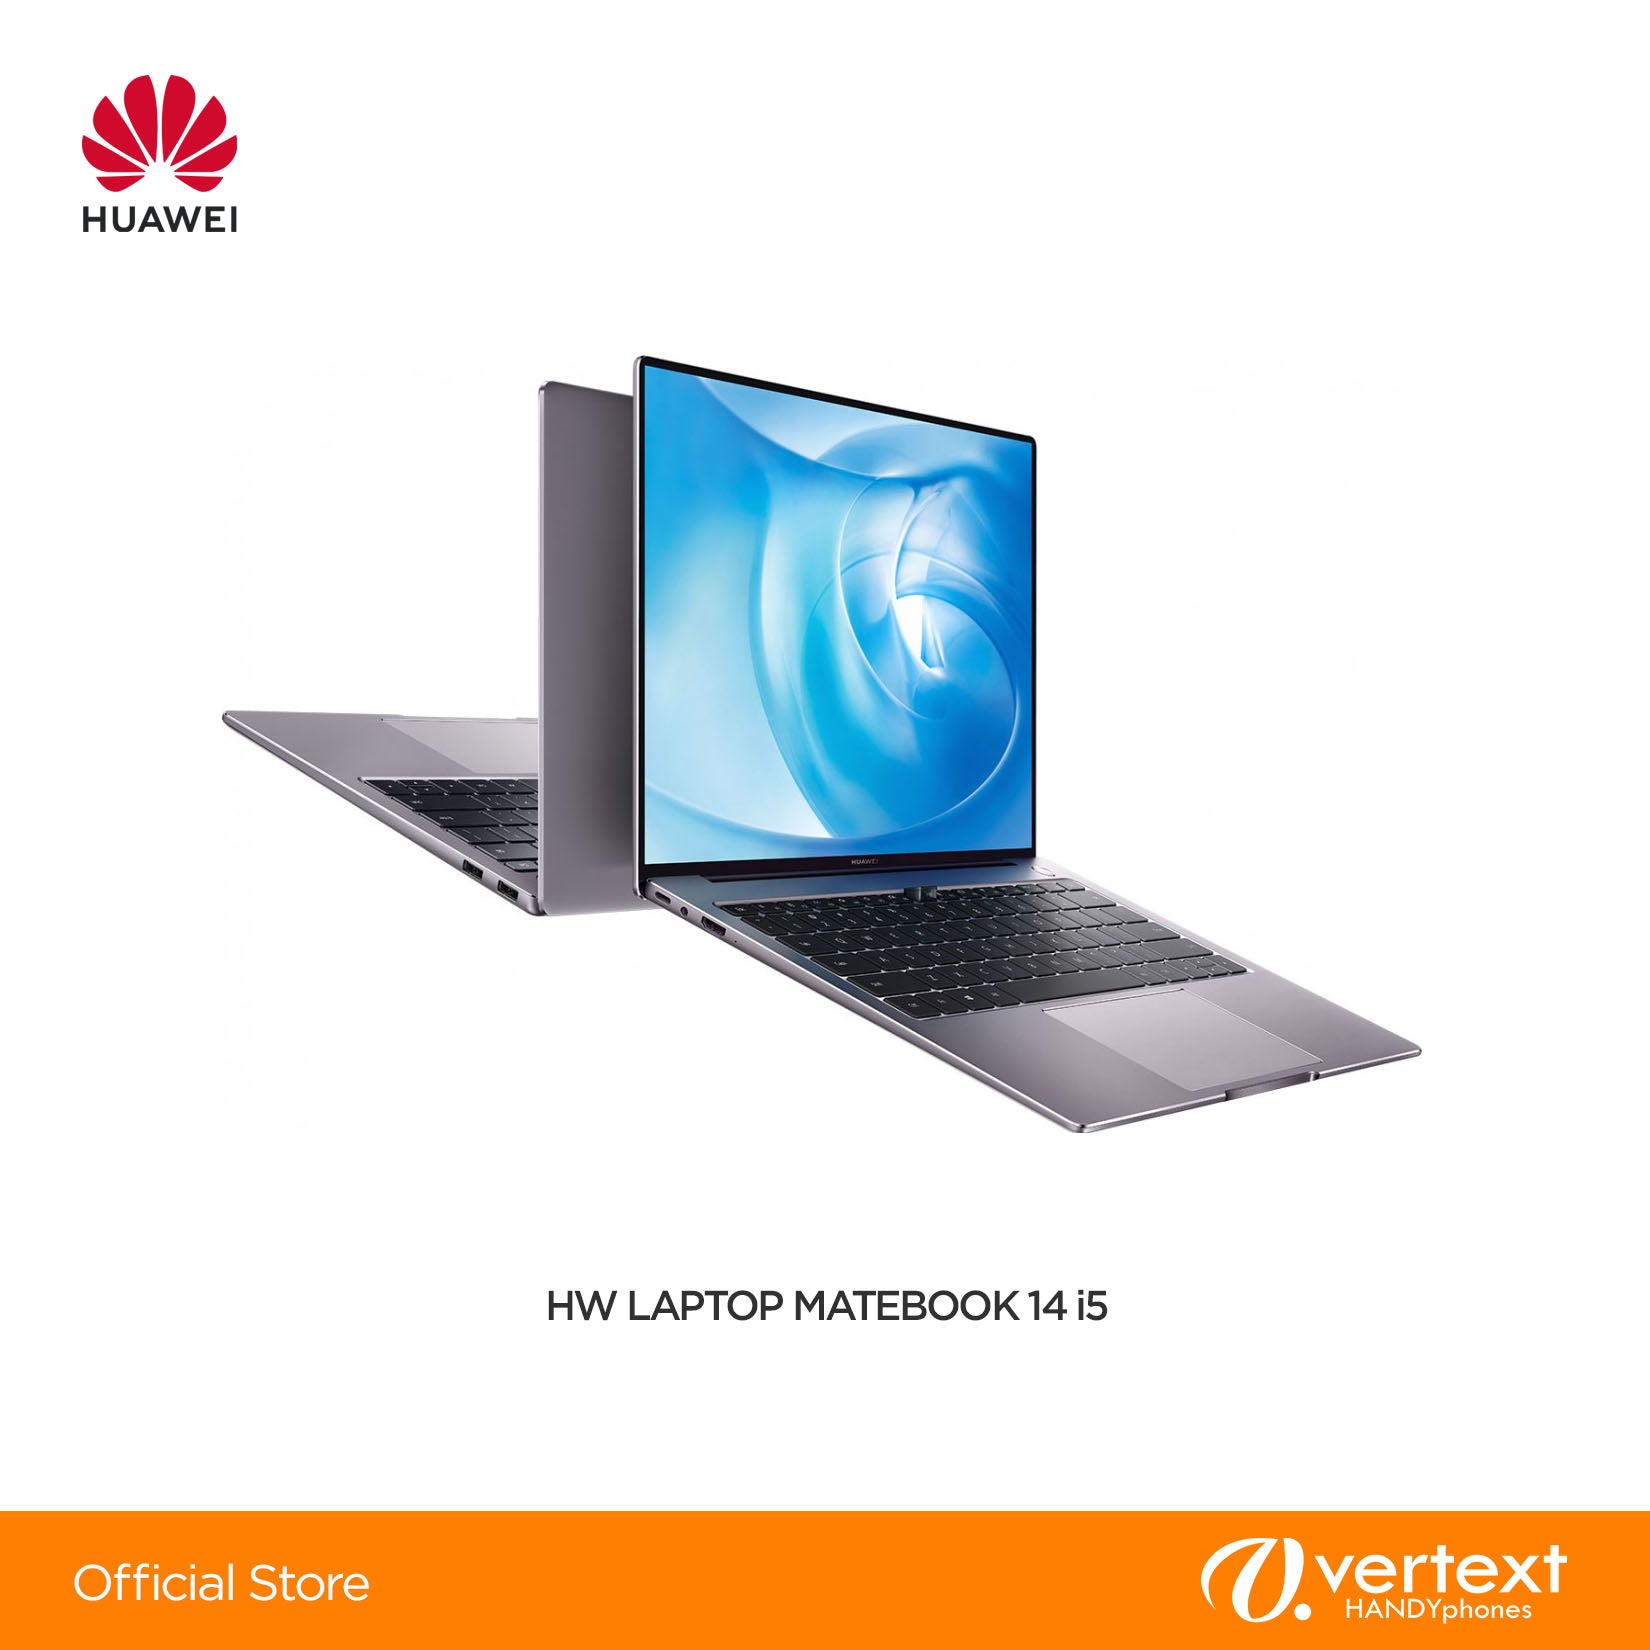 Huawei LAPTOP MATEBOOK 14 i5 14 INCHES